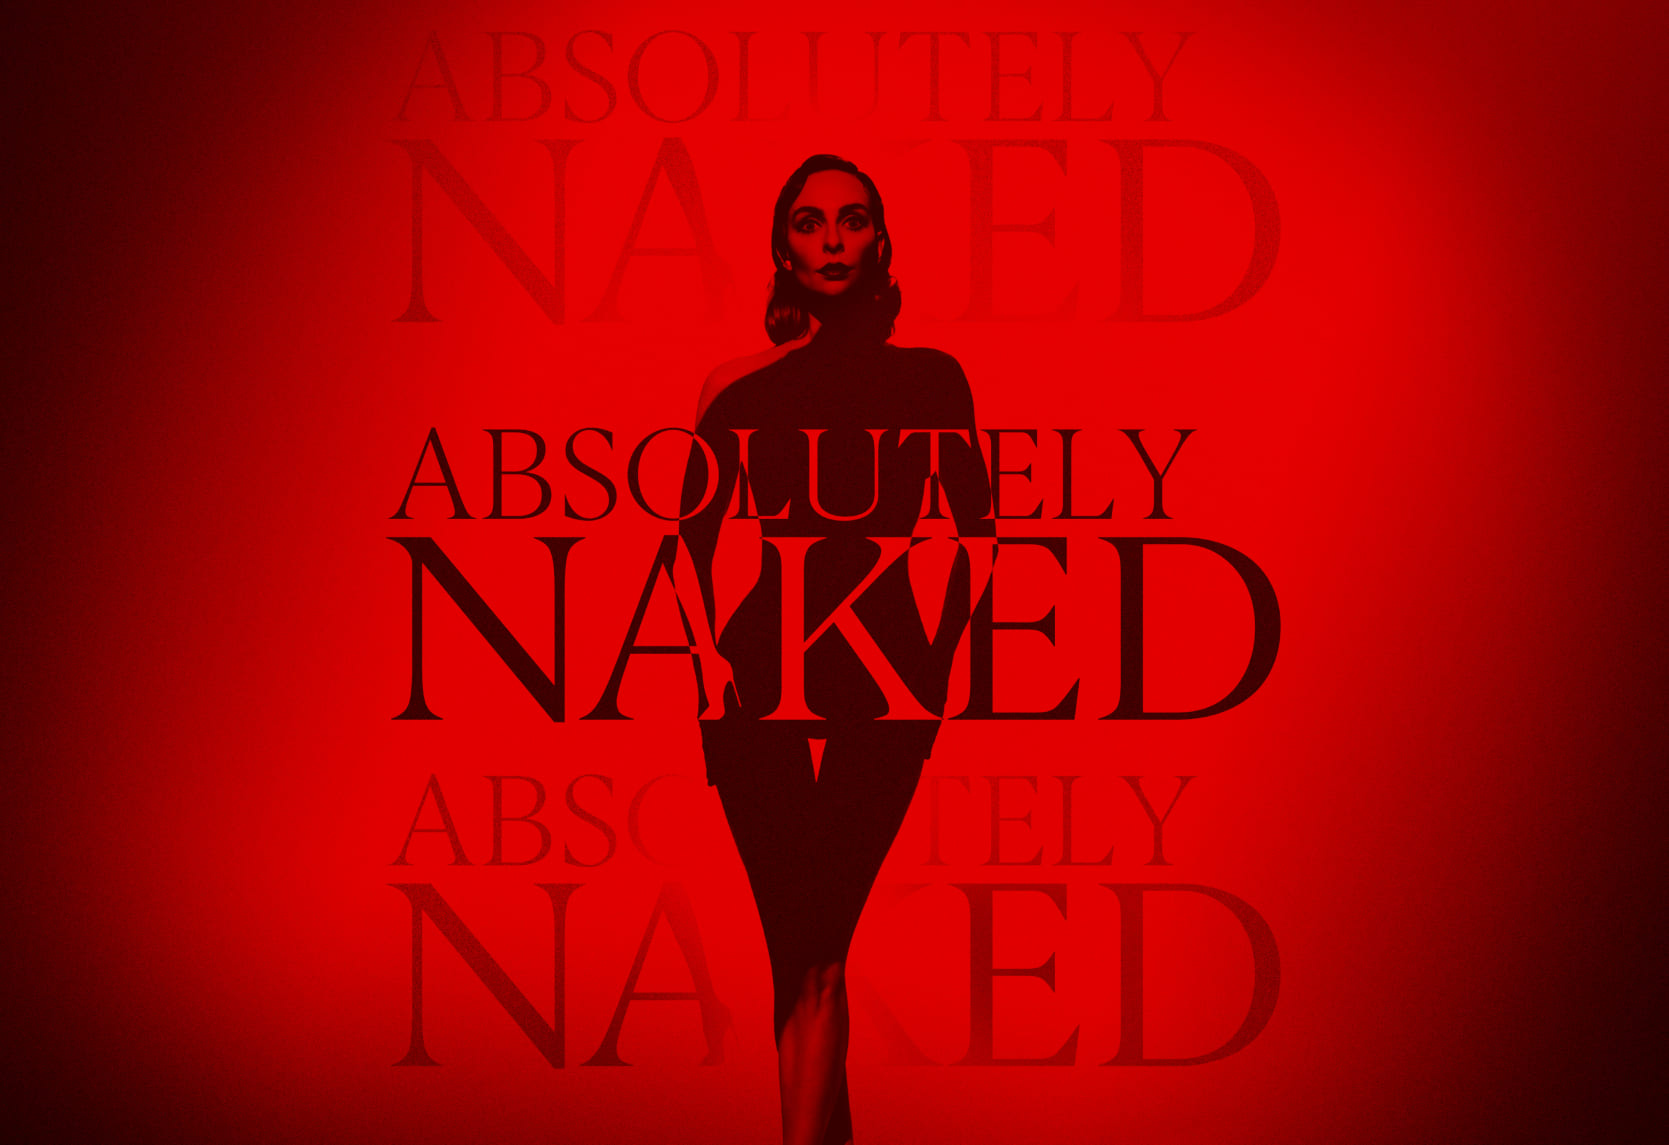 The long-awaited premiere of the "Absolutely naked" show with Ekaterina Varnava